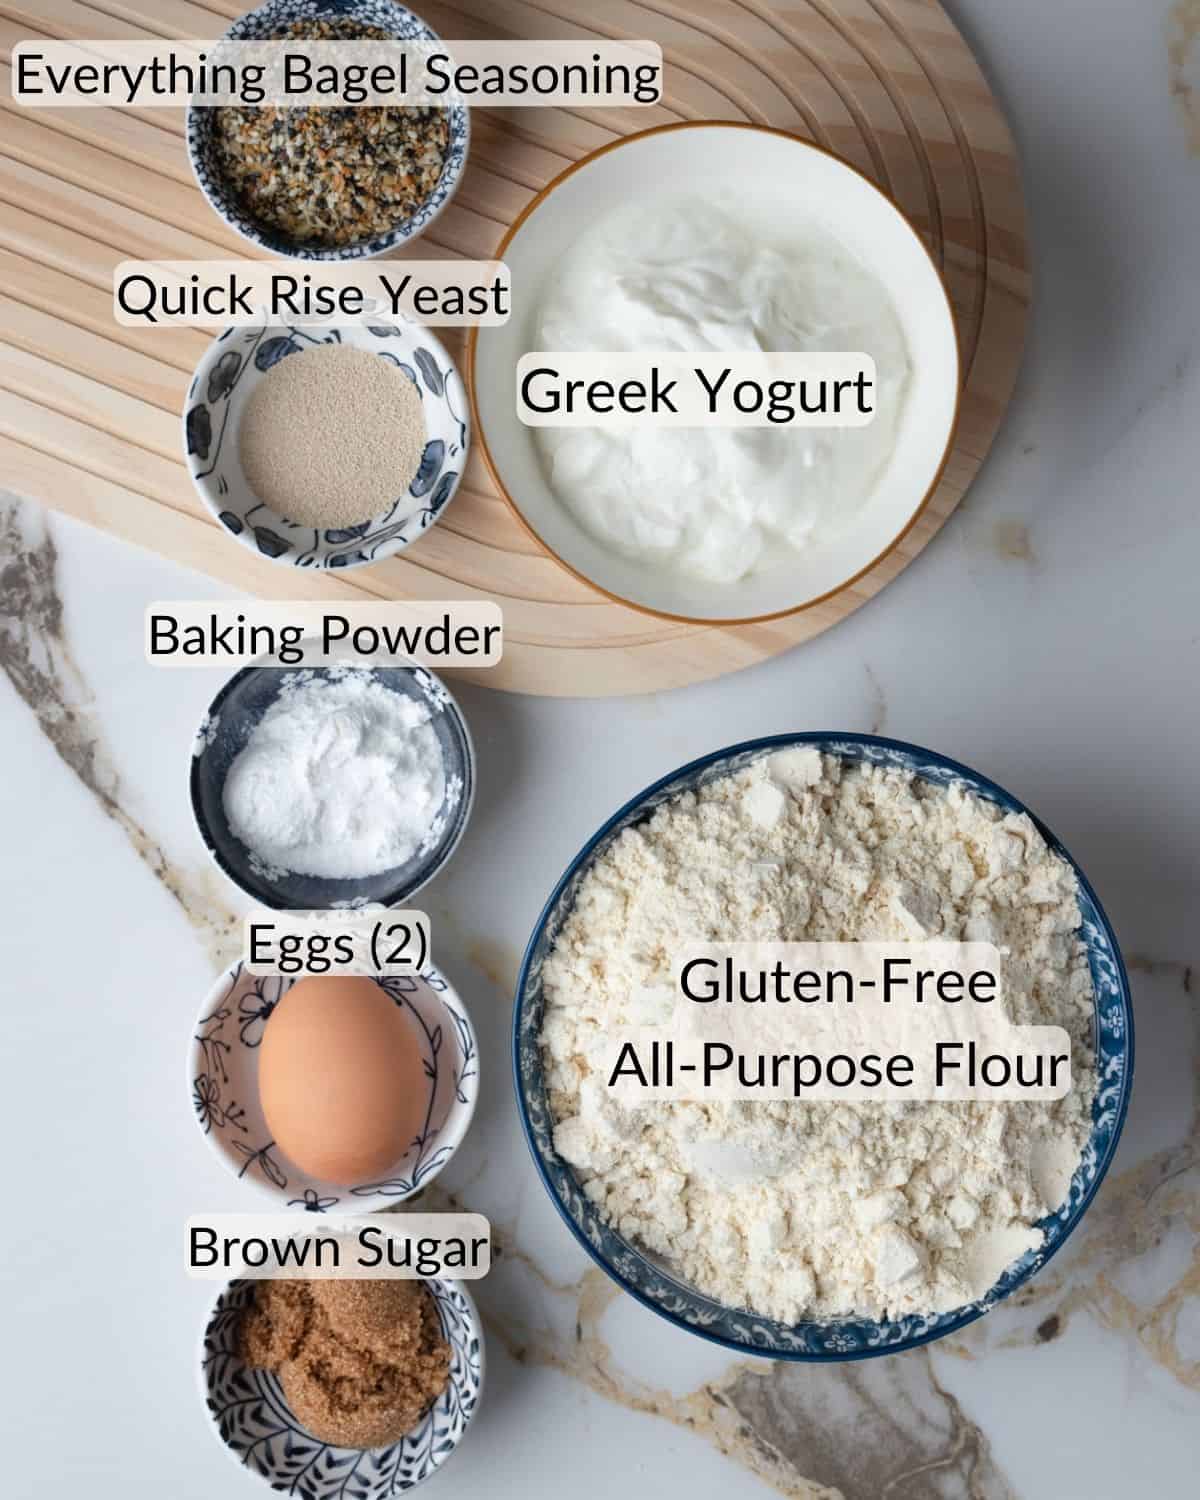 An array of ingredients on a bamboo mat for gluten-free bagels, including bowls labeled with Everything Bagel Seasoning, Quick Rise Yeast, Greek Yogurt, Baking Powder, two Eggs, Brown Sugar, and a larger bowl of Gluten-Free All-Purpose Flour.